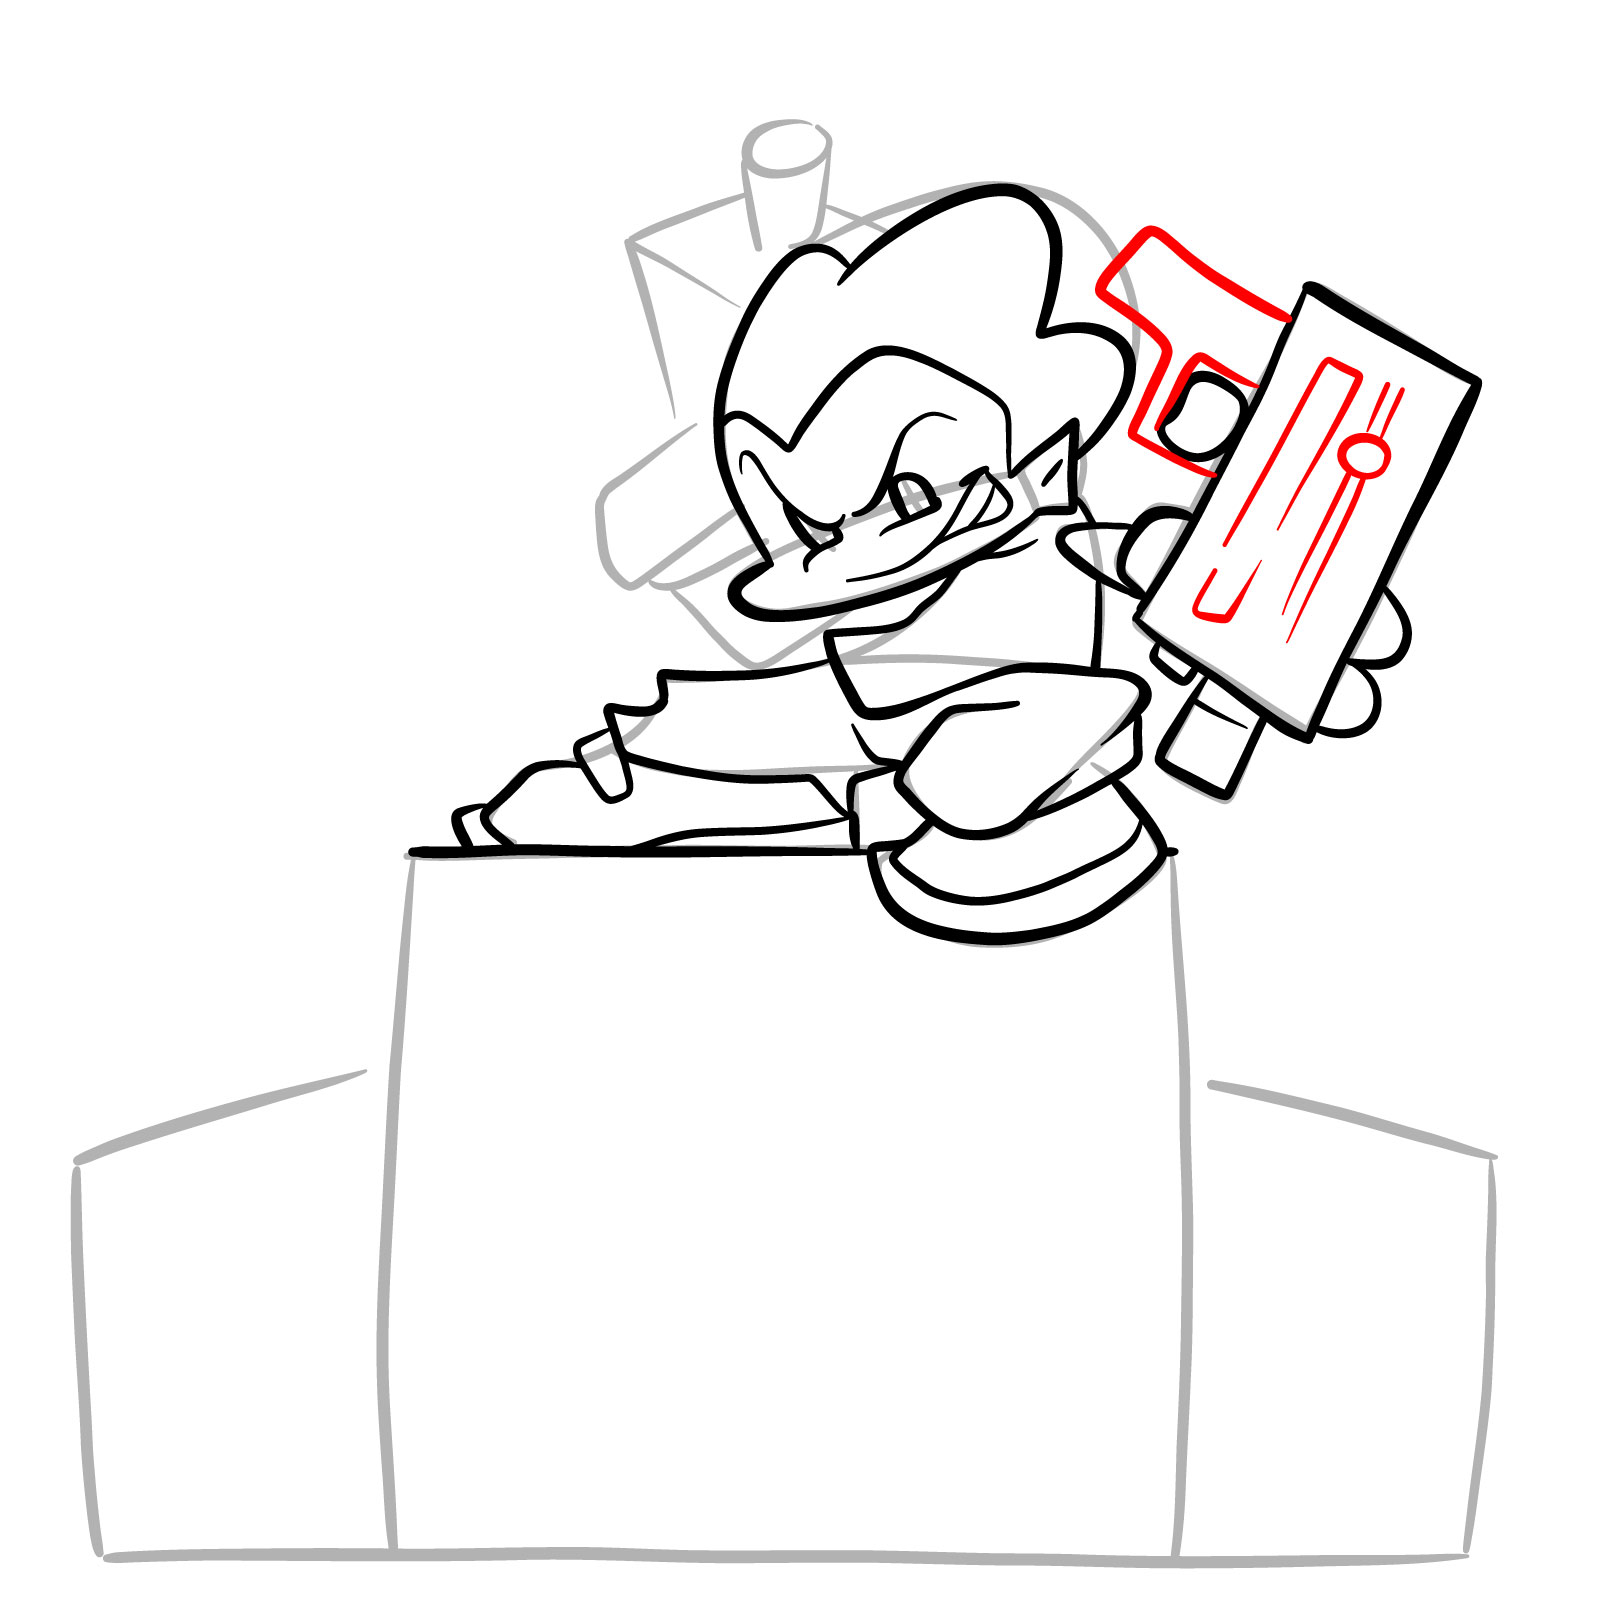 How to draw Pico on the speakers - step 19